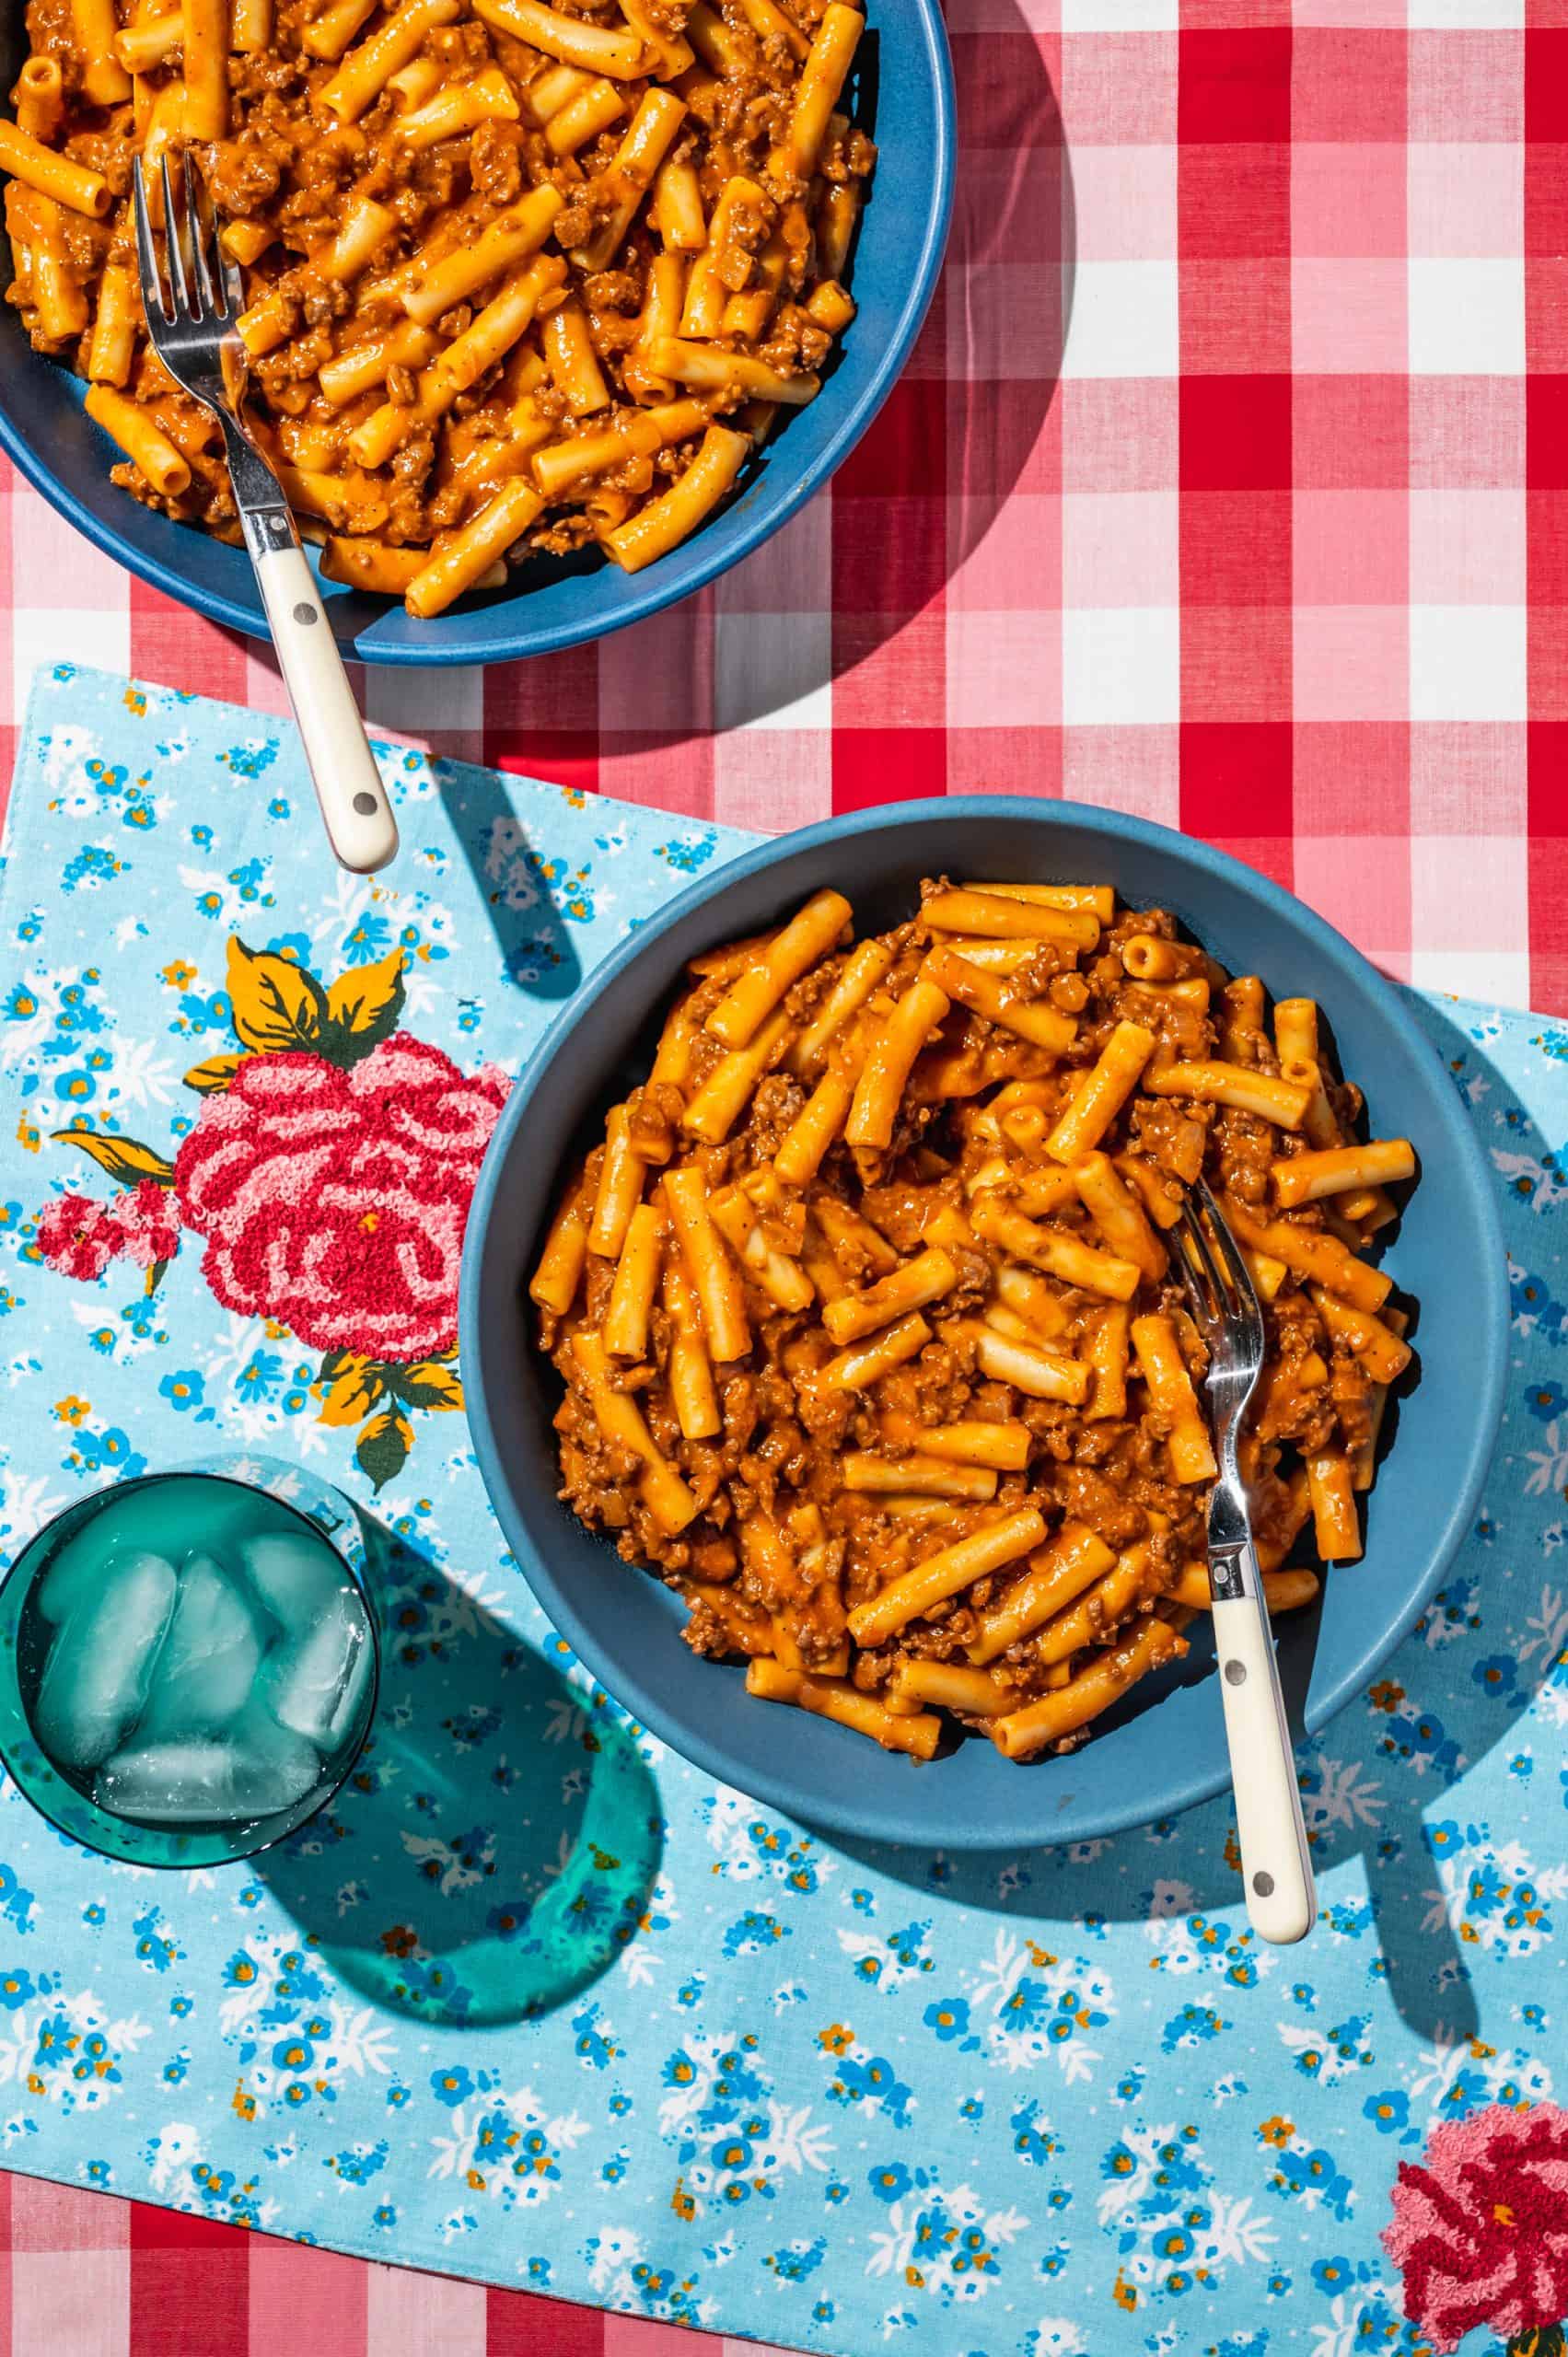 two bowls of homemade beefaroni on a blue placement on a red checkered tablecloth